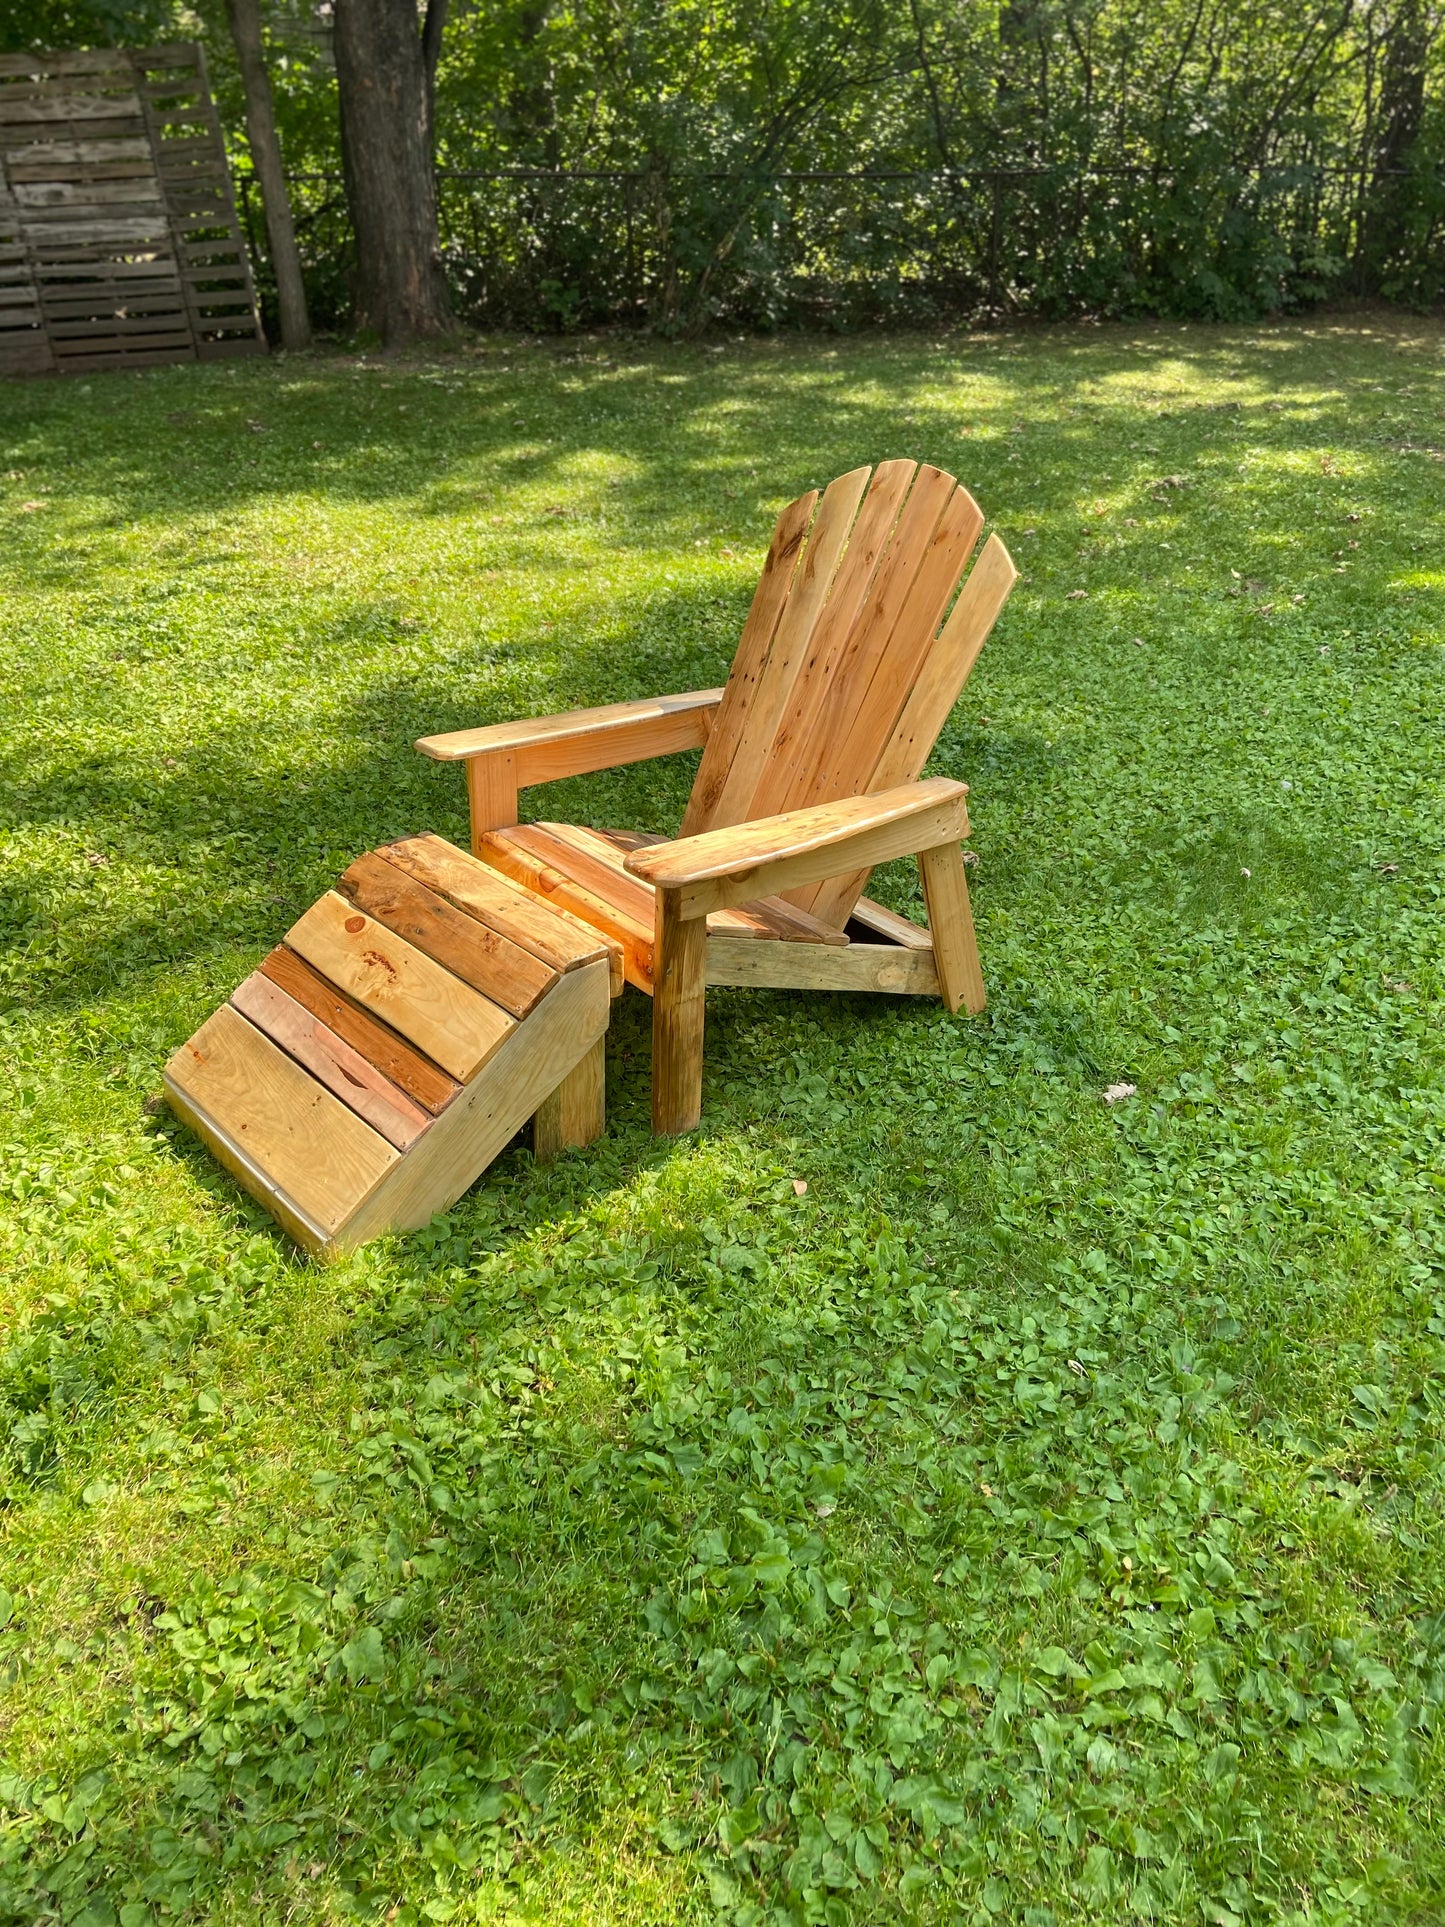 Adirondack chair and foot lounger